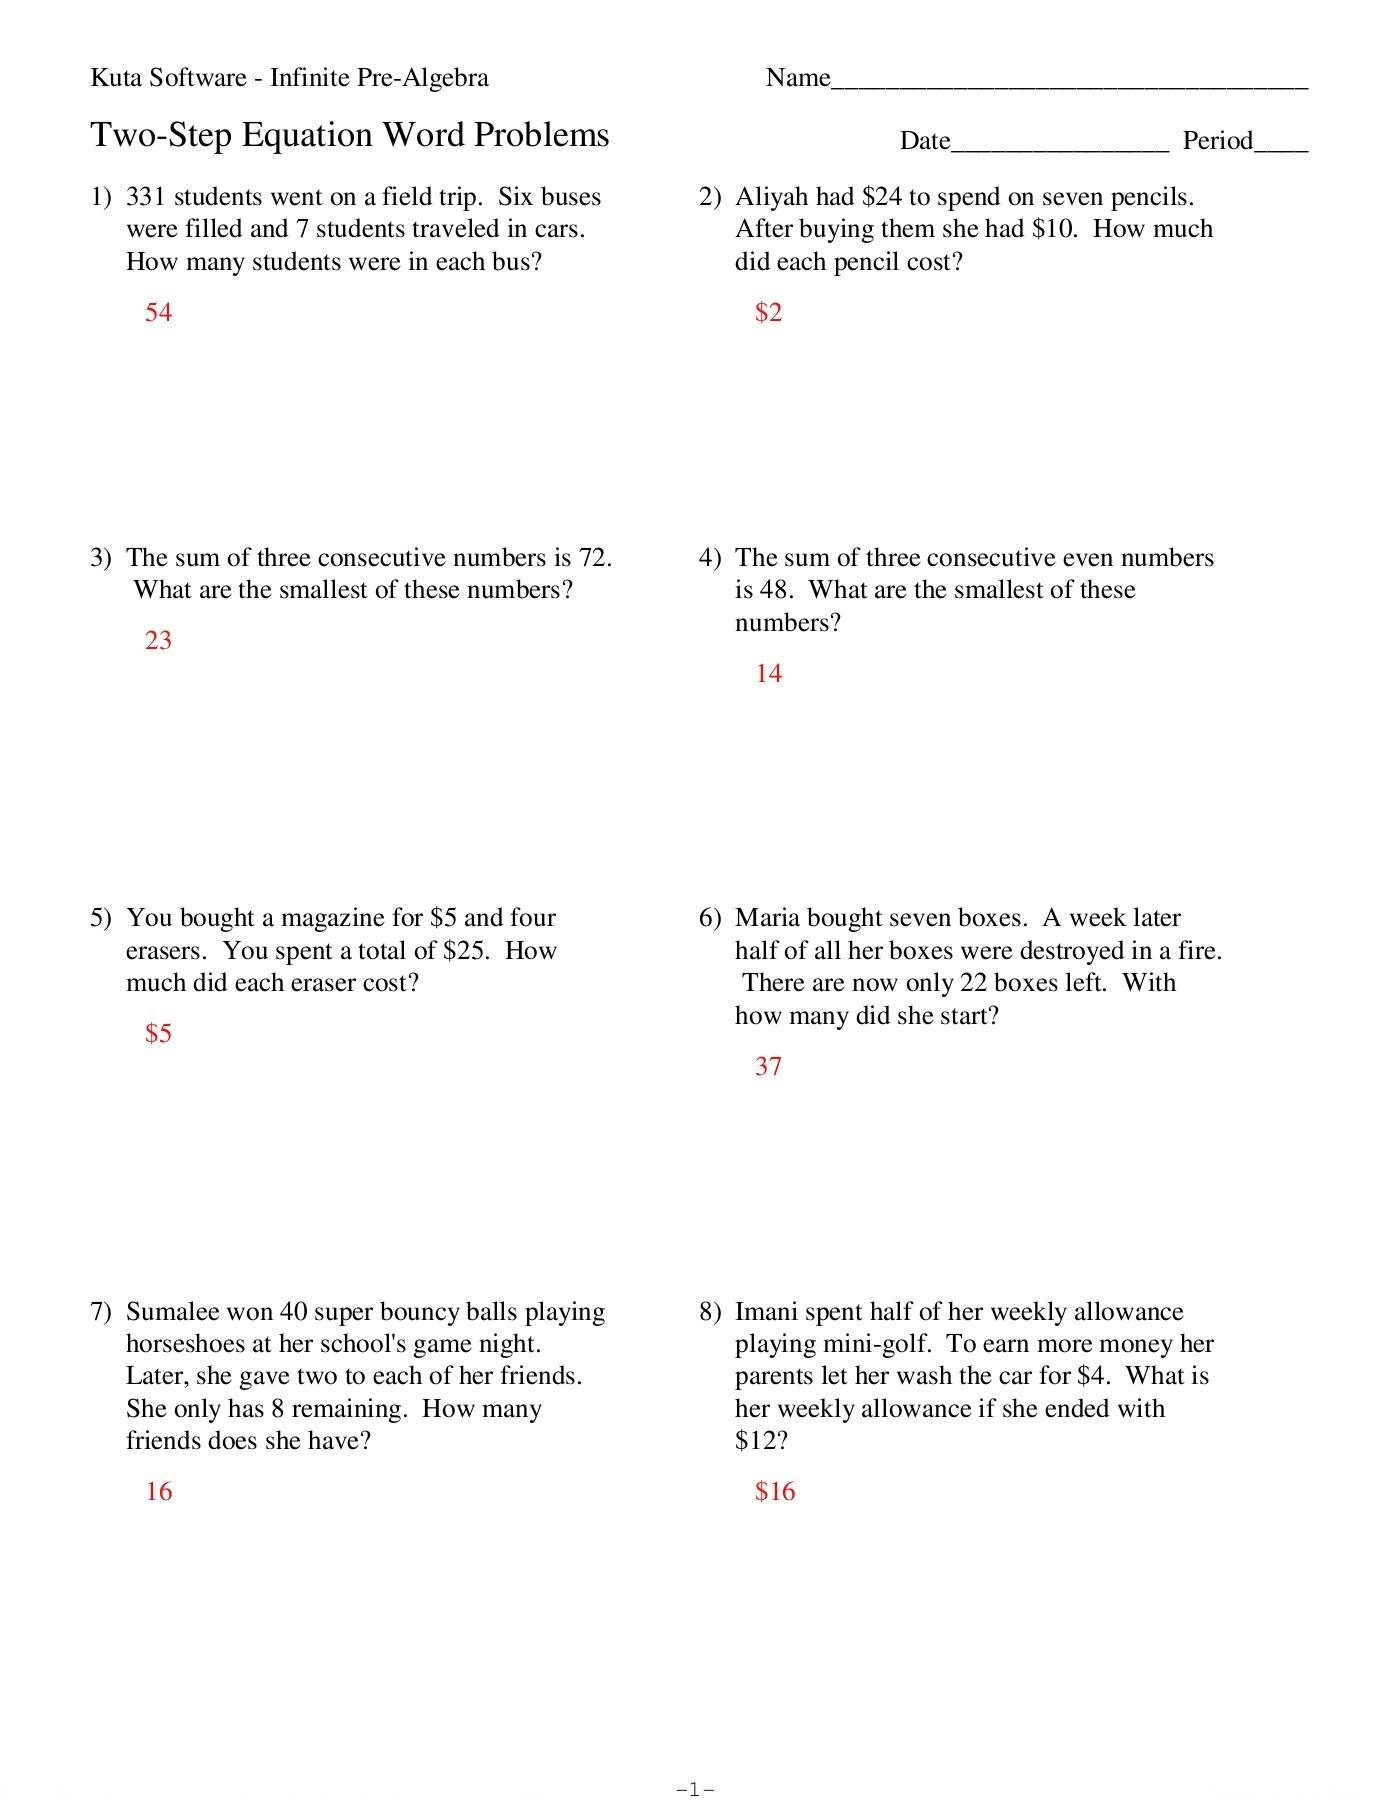 Two Step Equation Worksheet Two Step Word Problems Kuta software Llc Pages 1 4